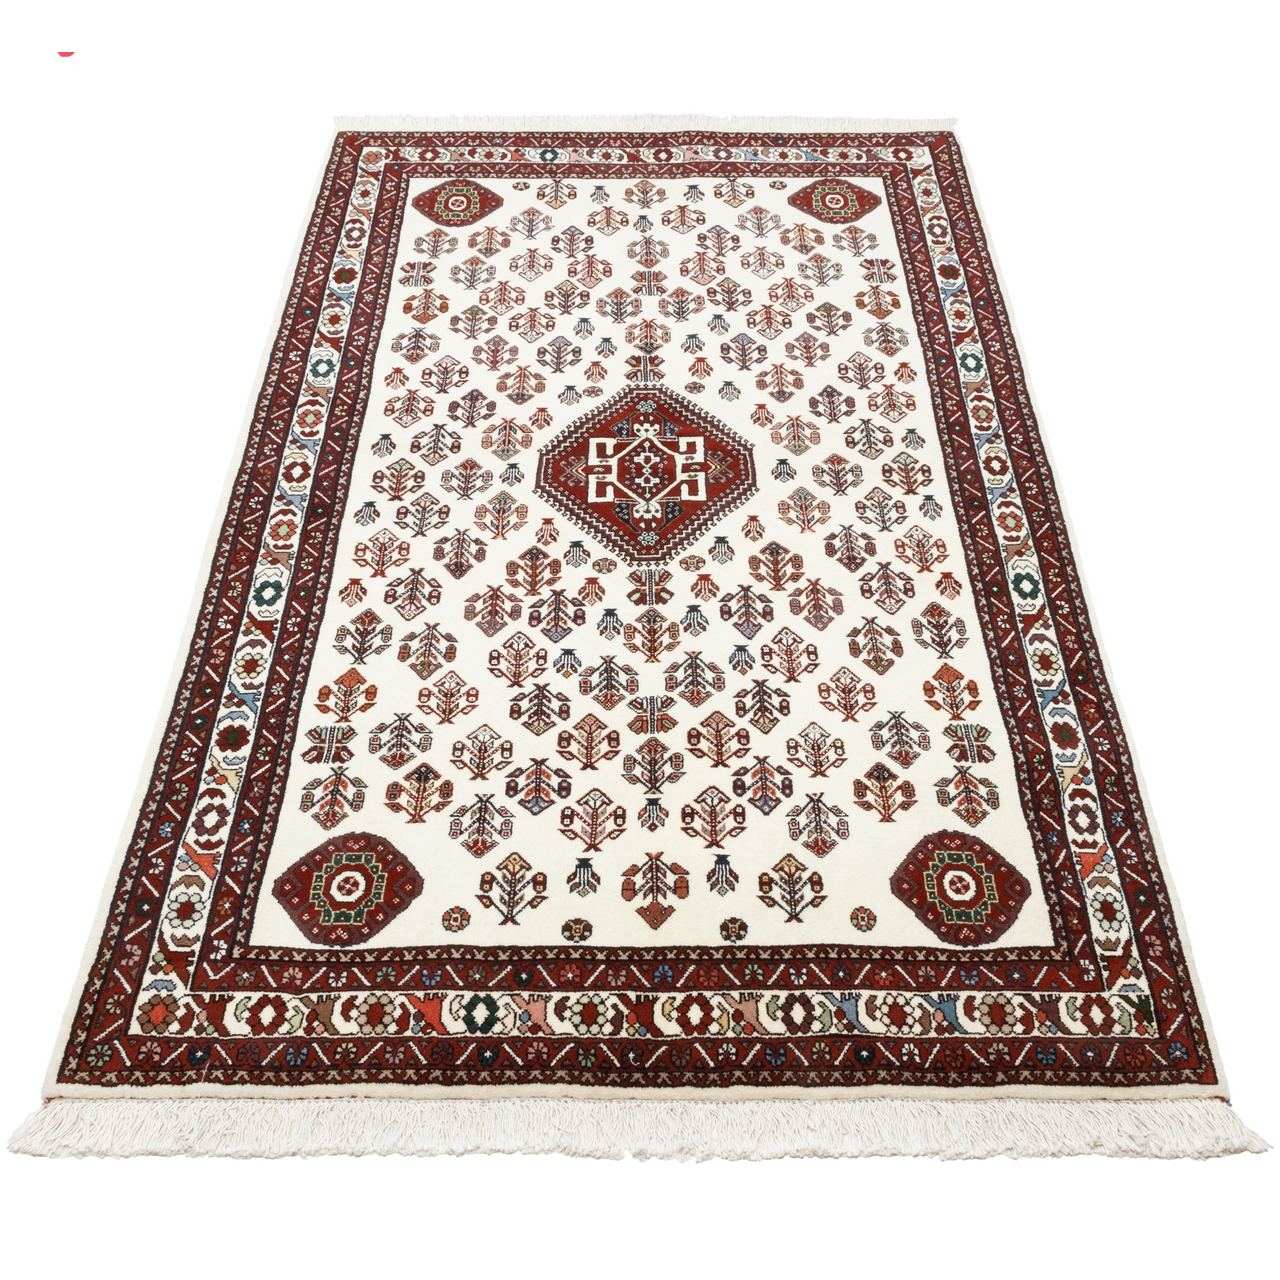 Two and a half meter handmade carpet by Persia, code 174598